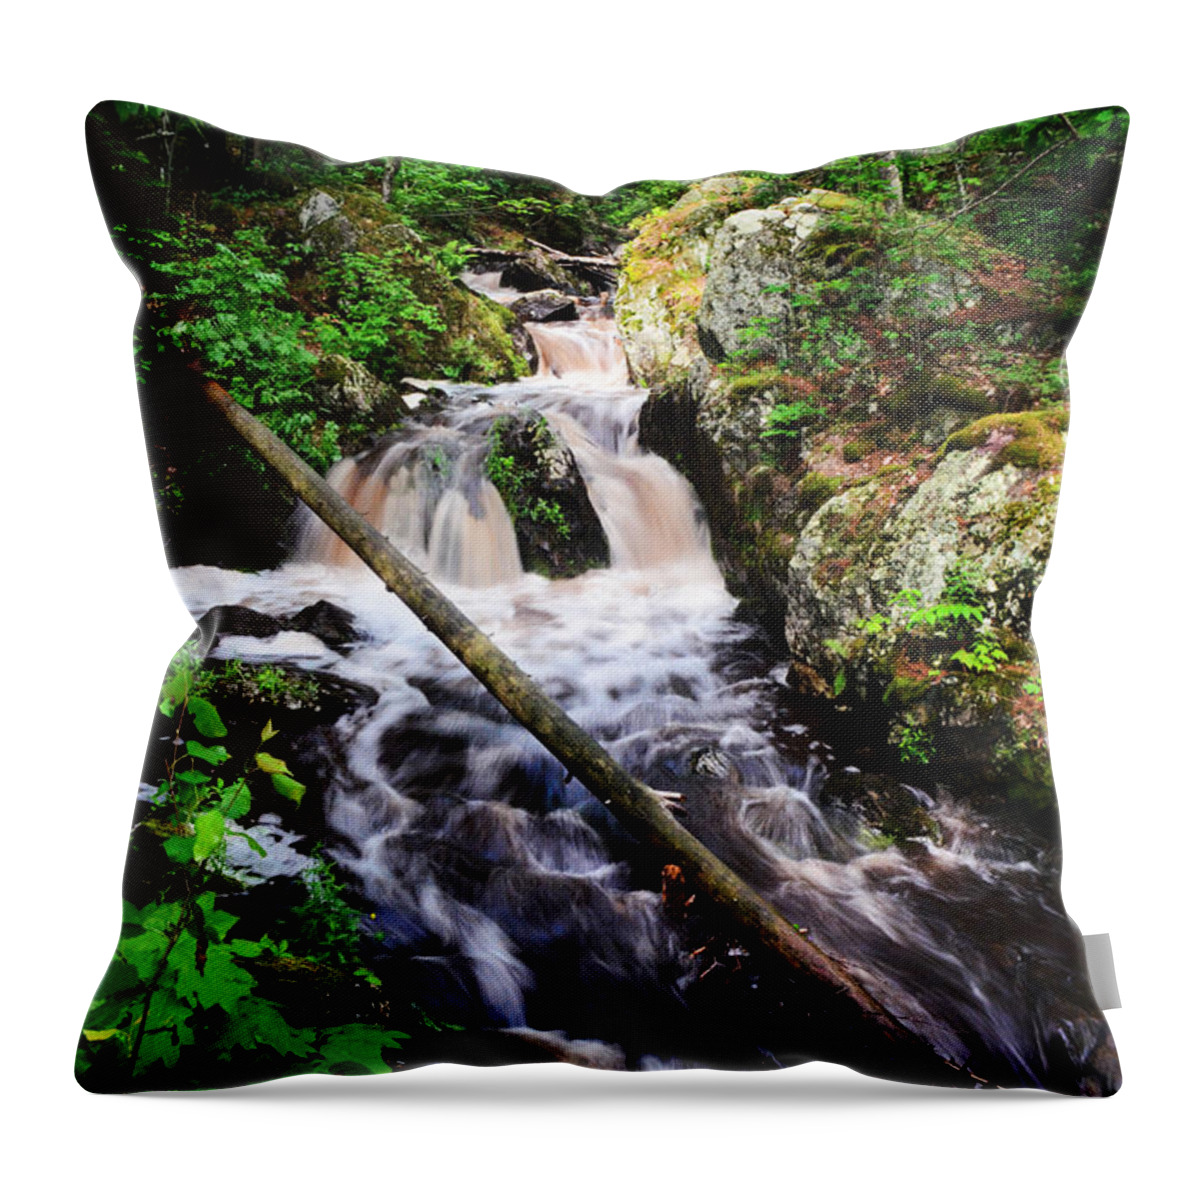 Waterfall Throw Pillow featuring the photograph Lwv60008 by Lee Winter